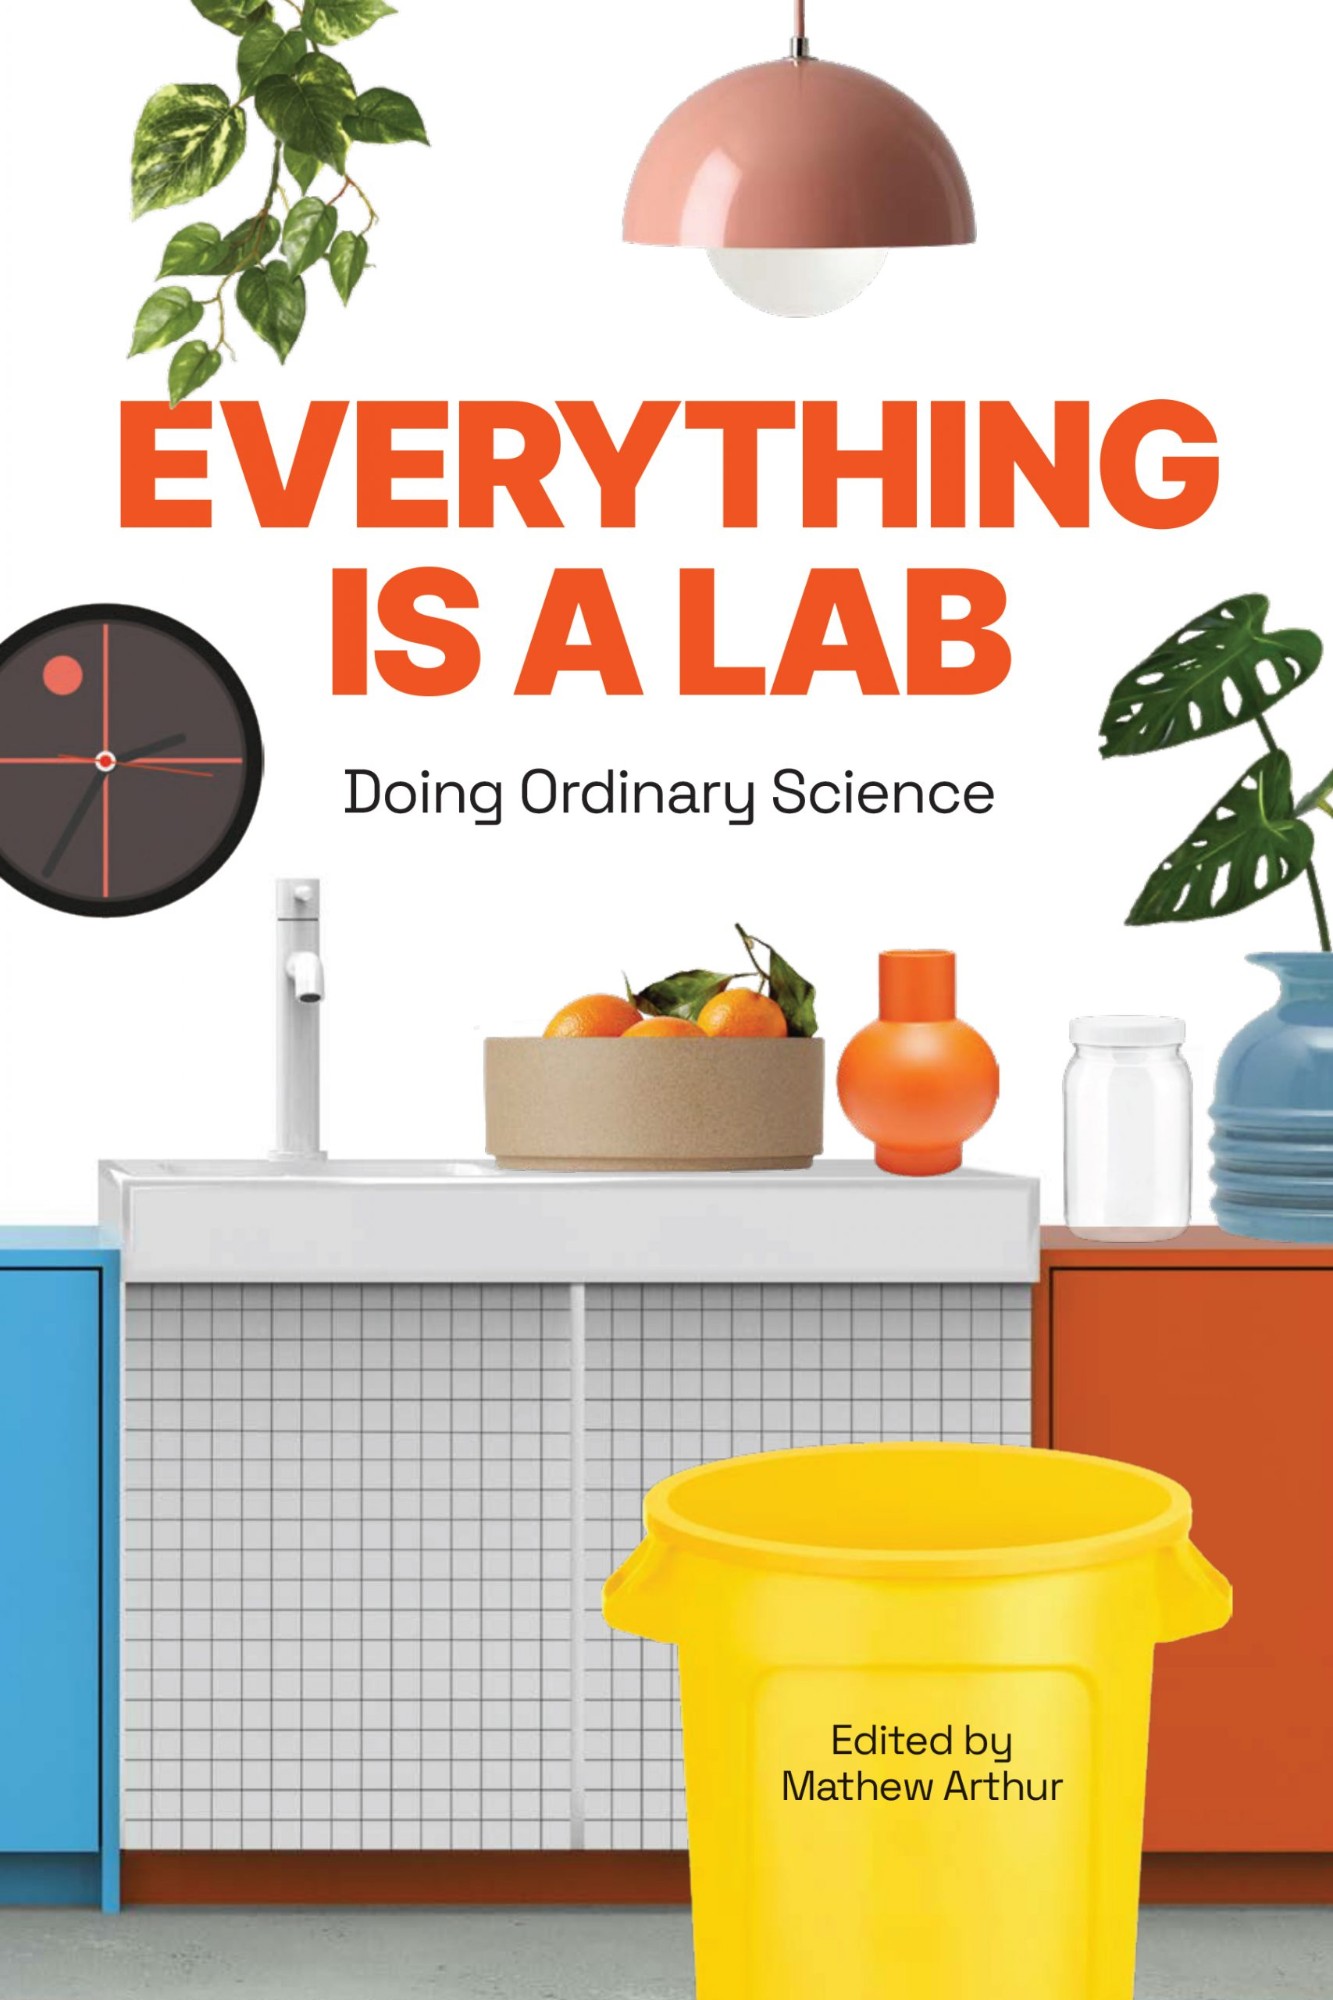 Everything is a Lab: Doing Ordinary Science, Edited by Mathew Arthur